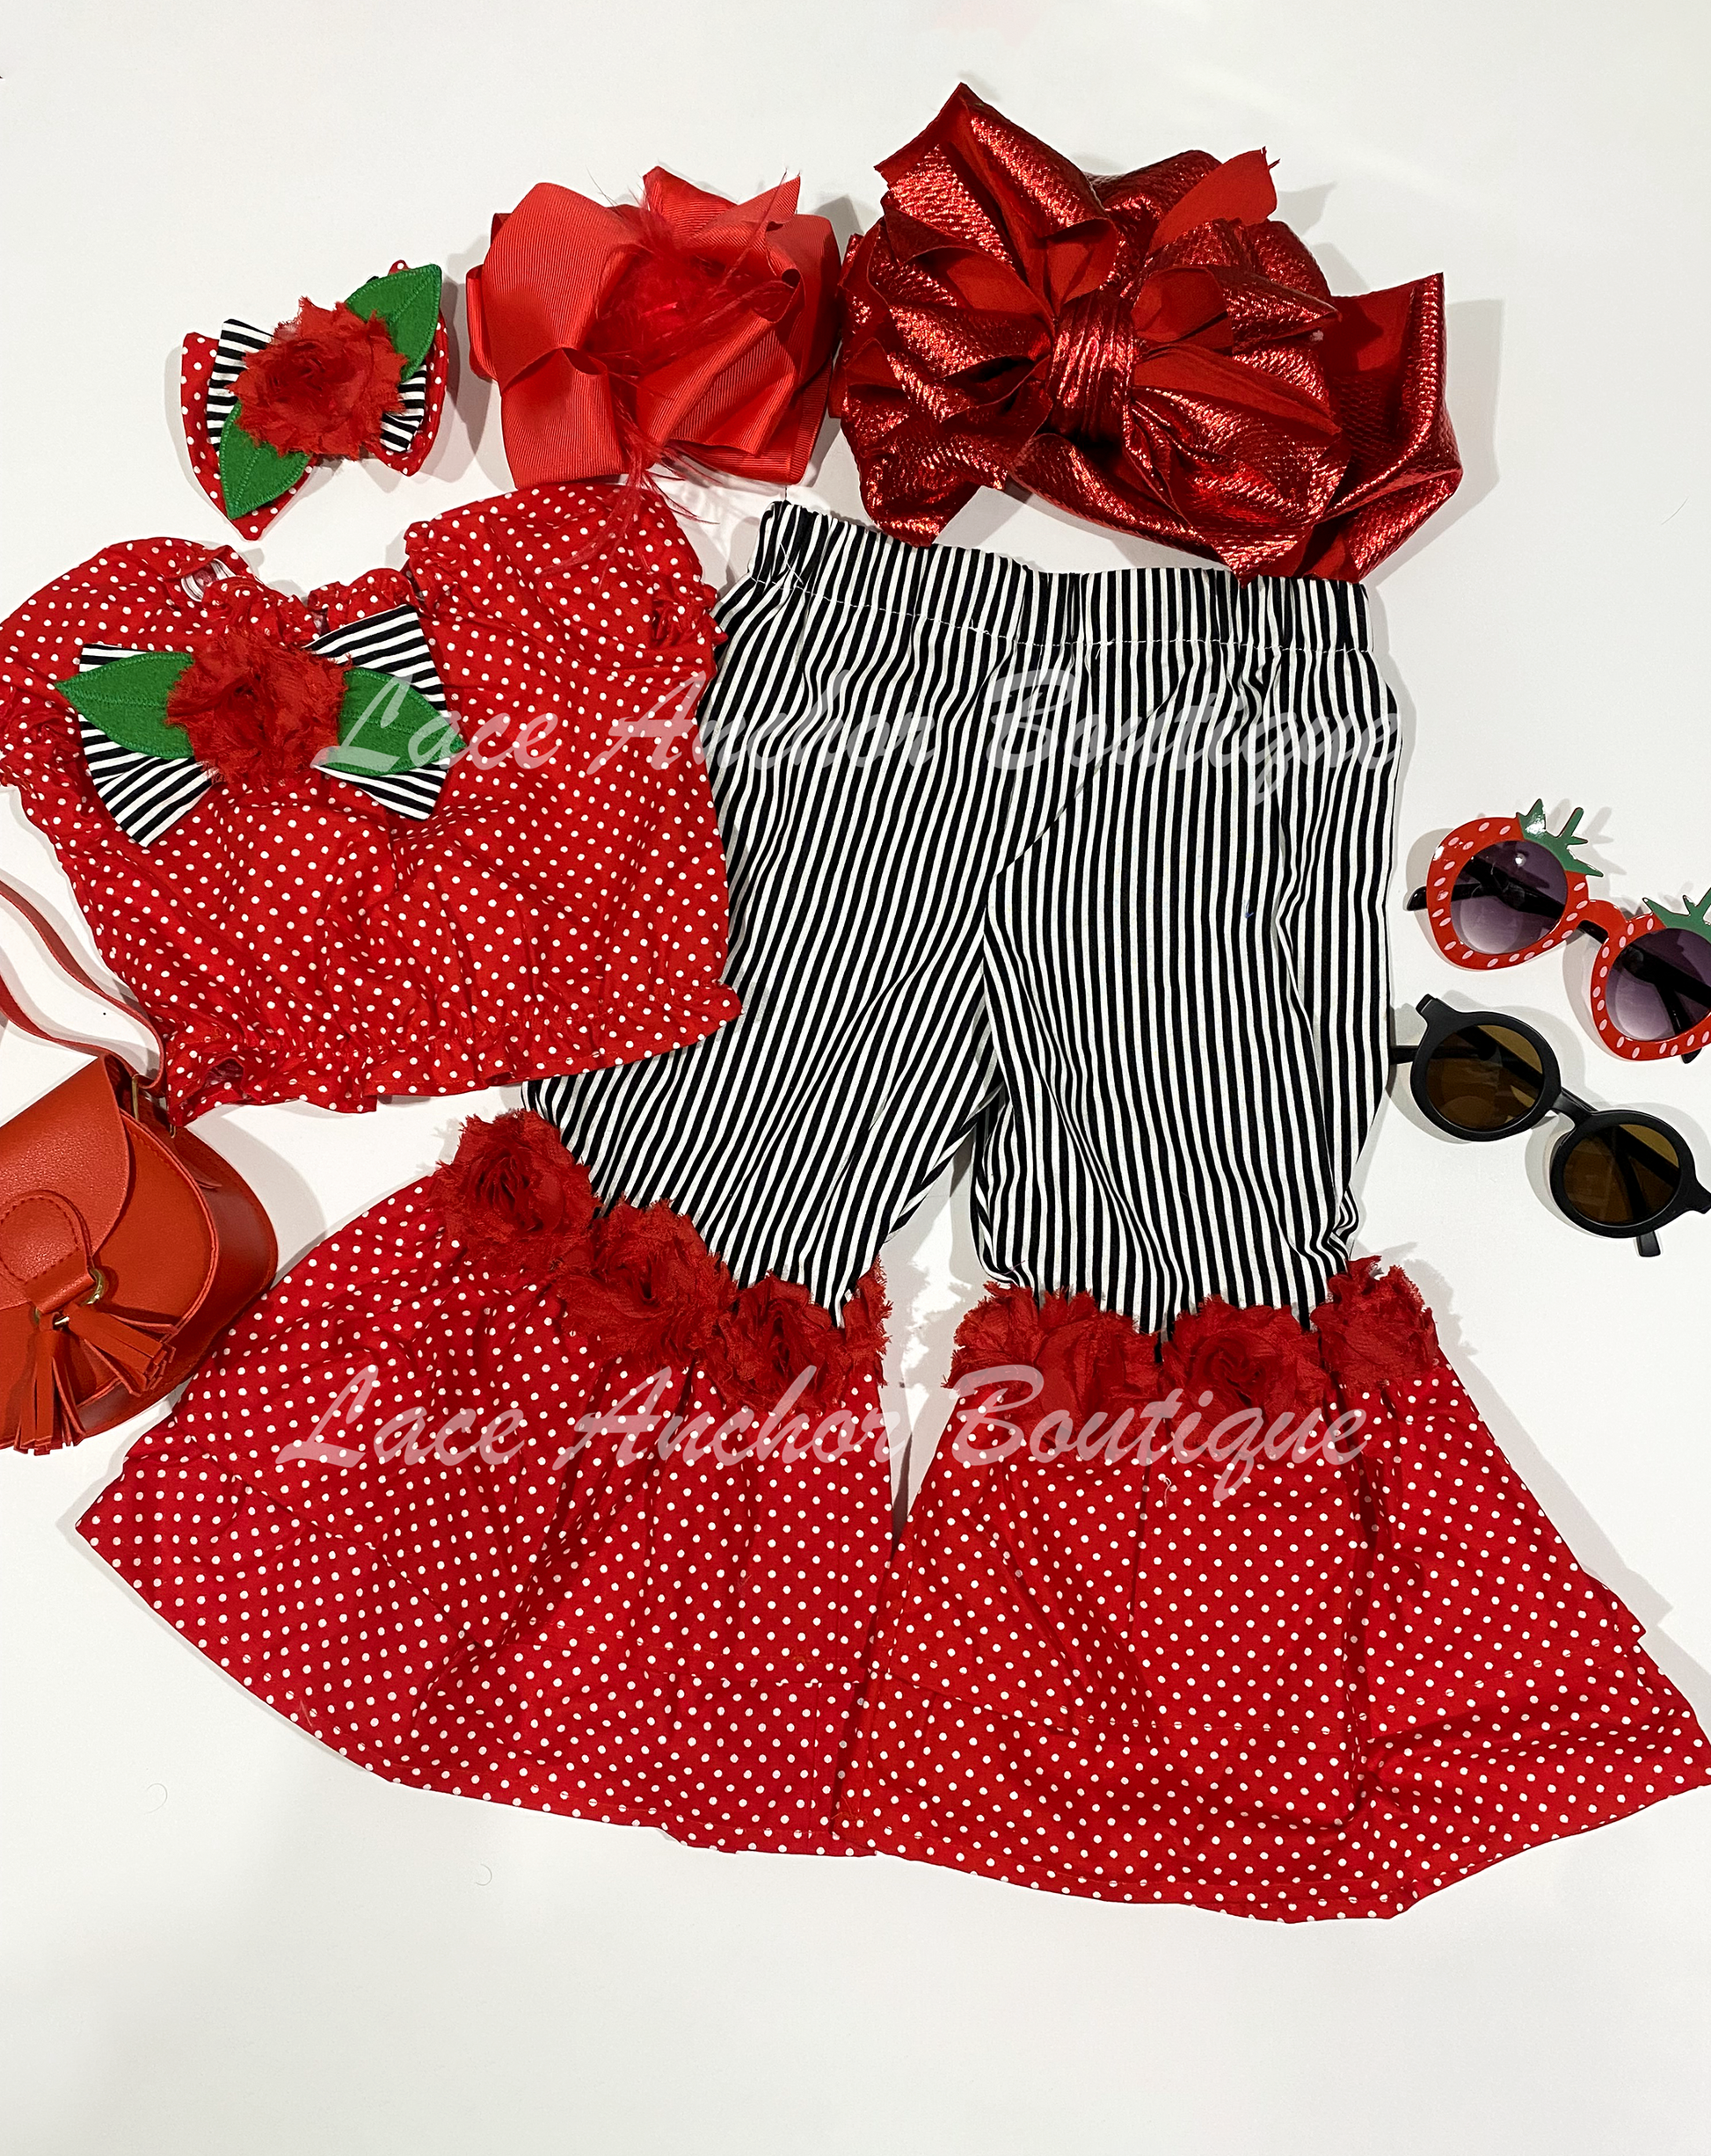 Girls 18M-2T One-of-a-Kind Red Rose Themed Outfit - Polka Dot & Stripes for Birthday or Pageant